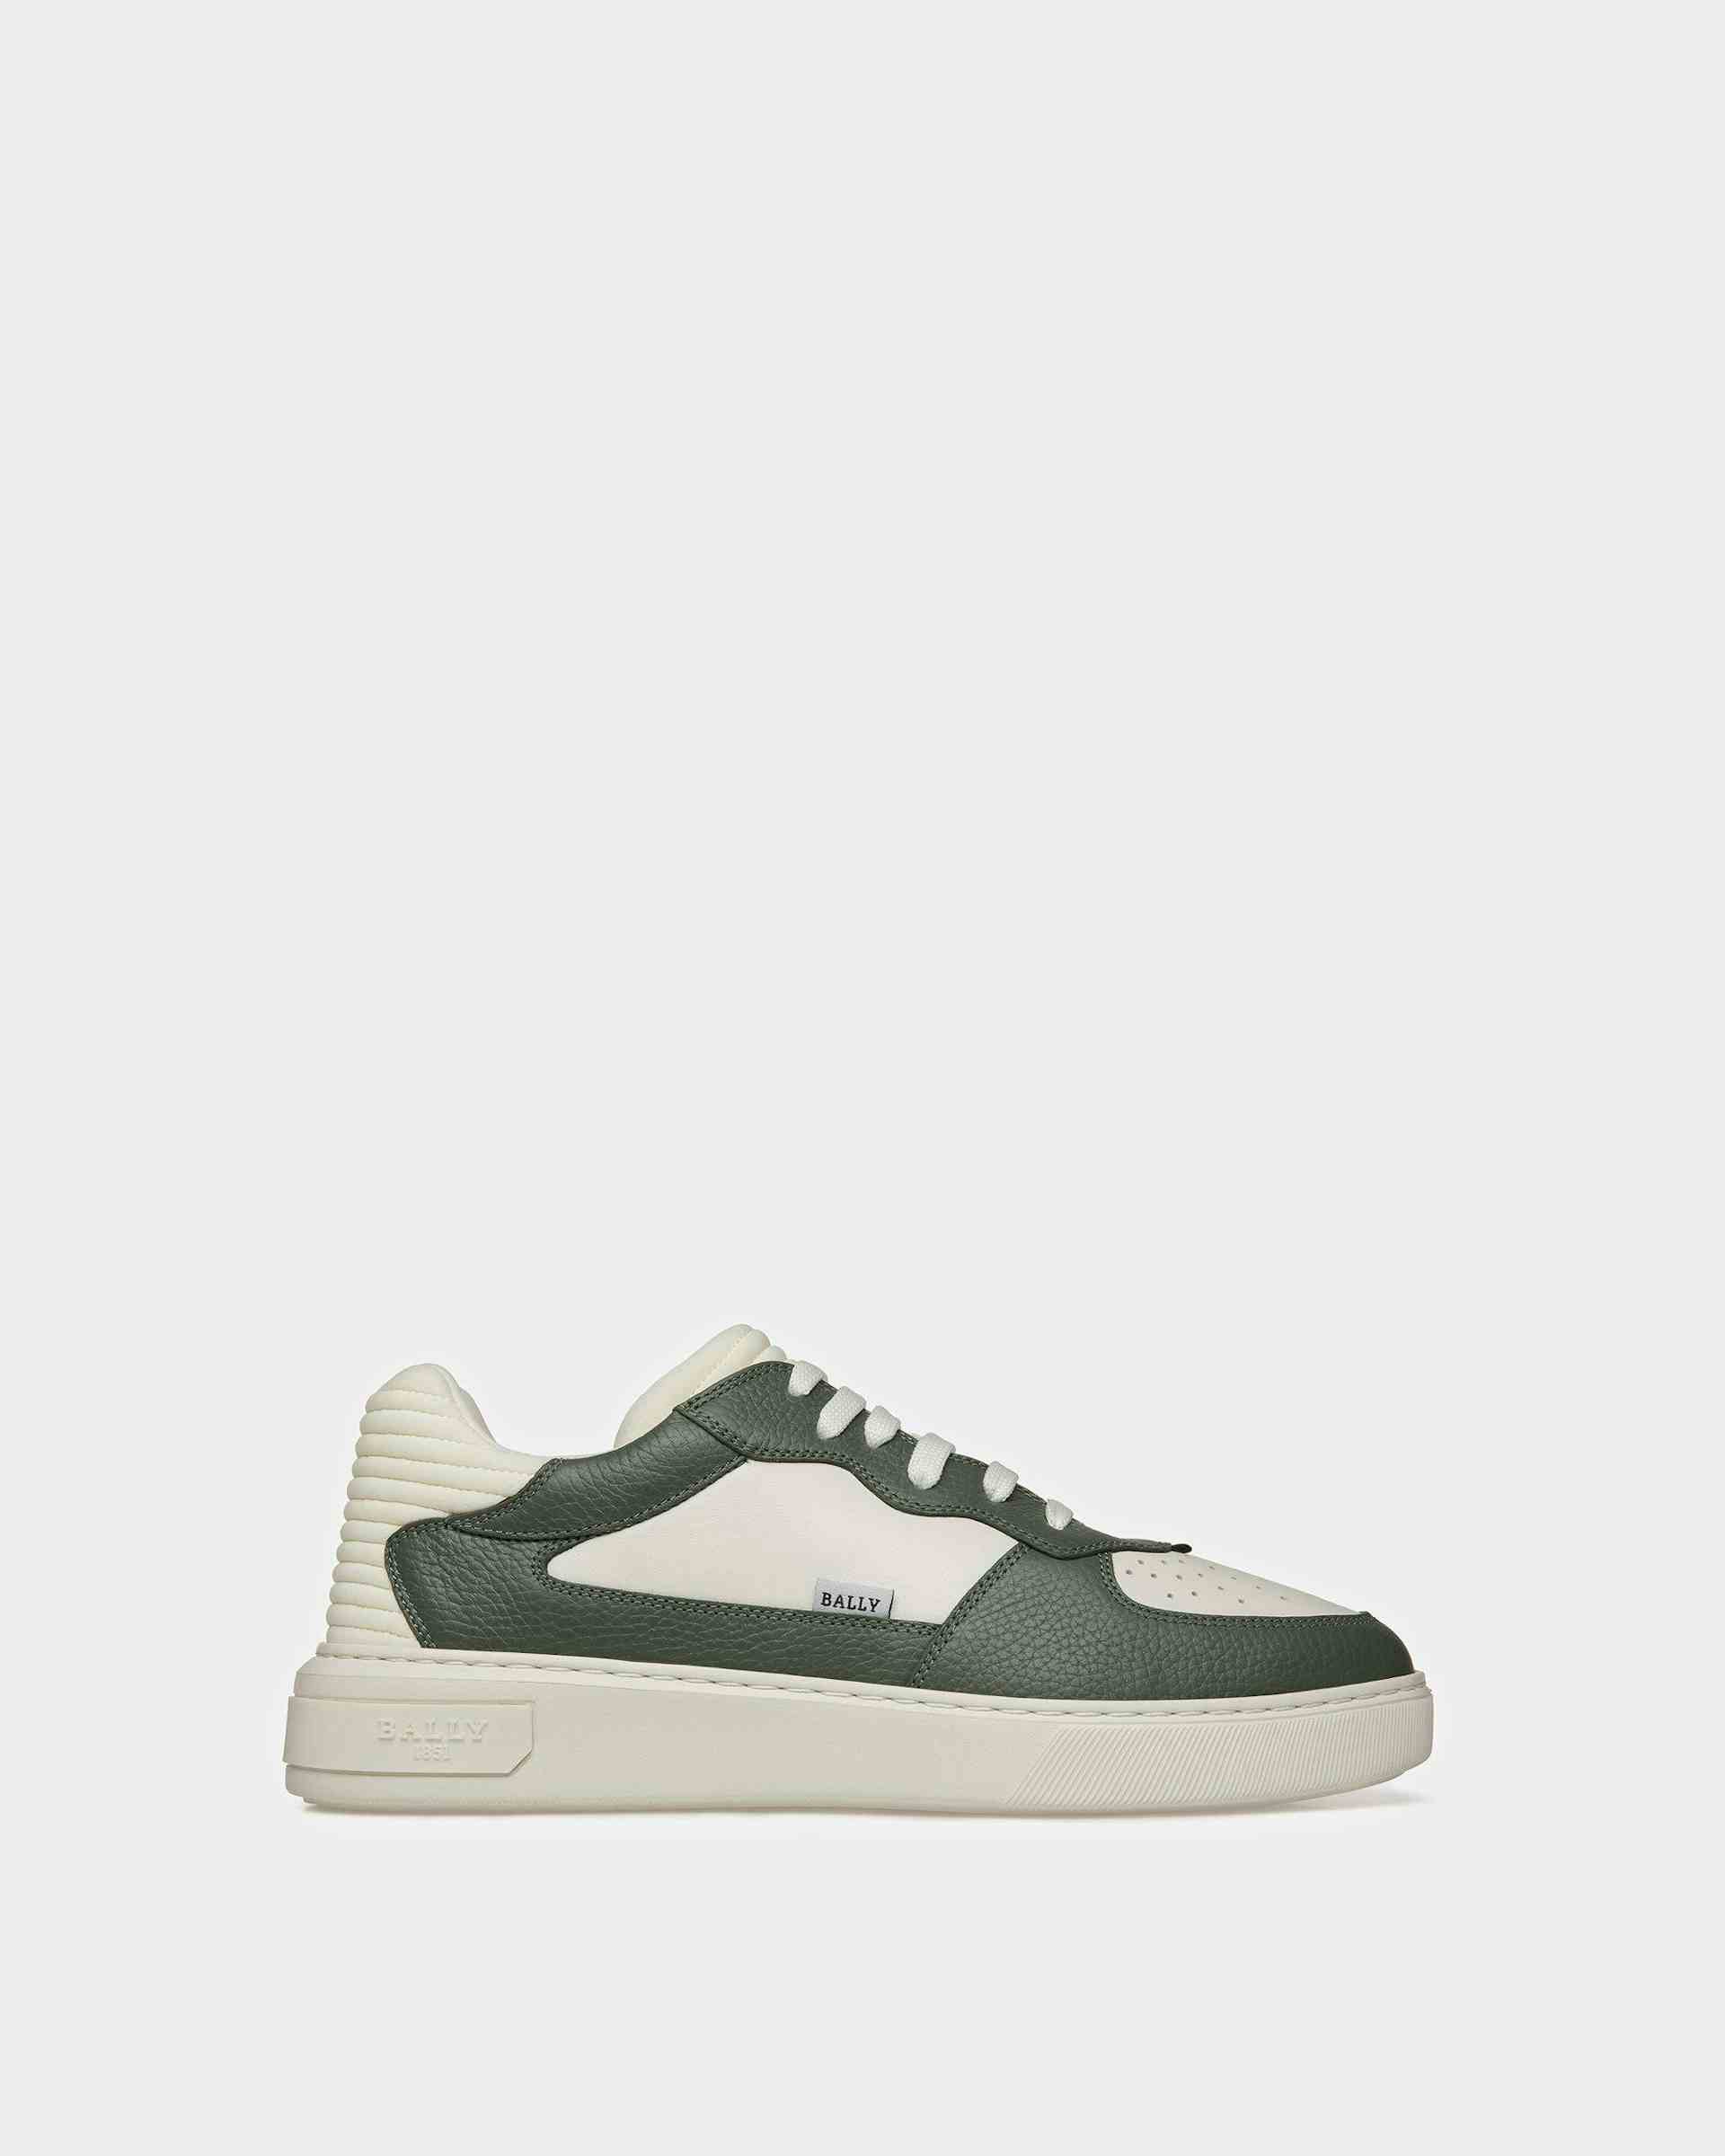 Mark Leather And Fabric Sneakers In Sage And White - Men's - Bally